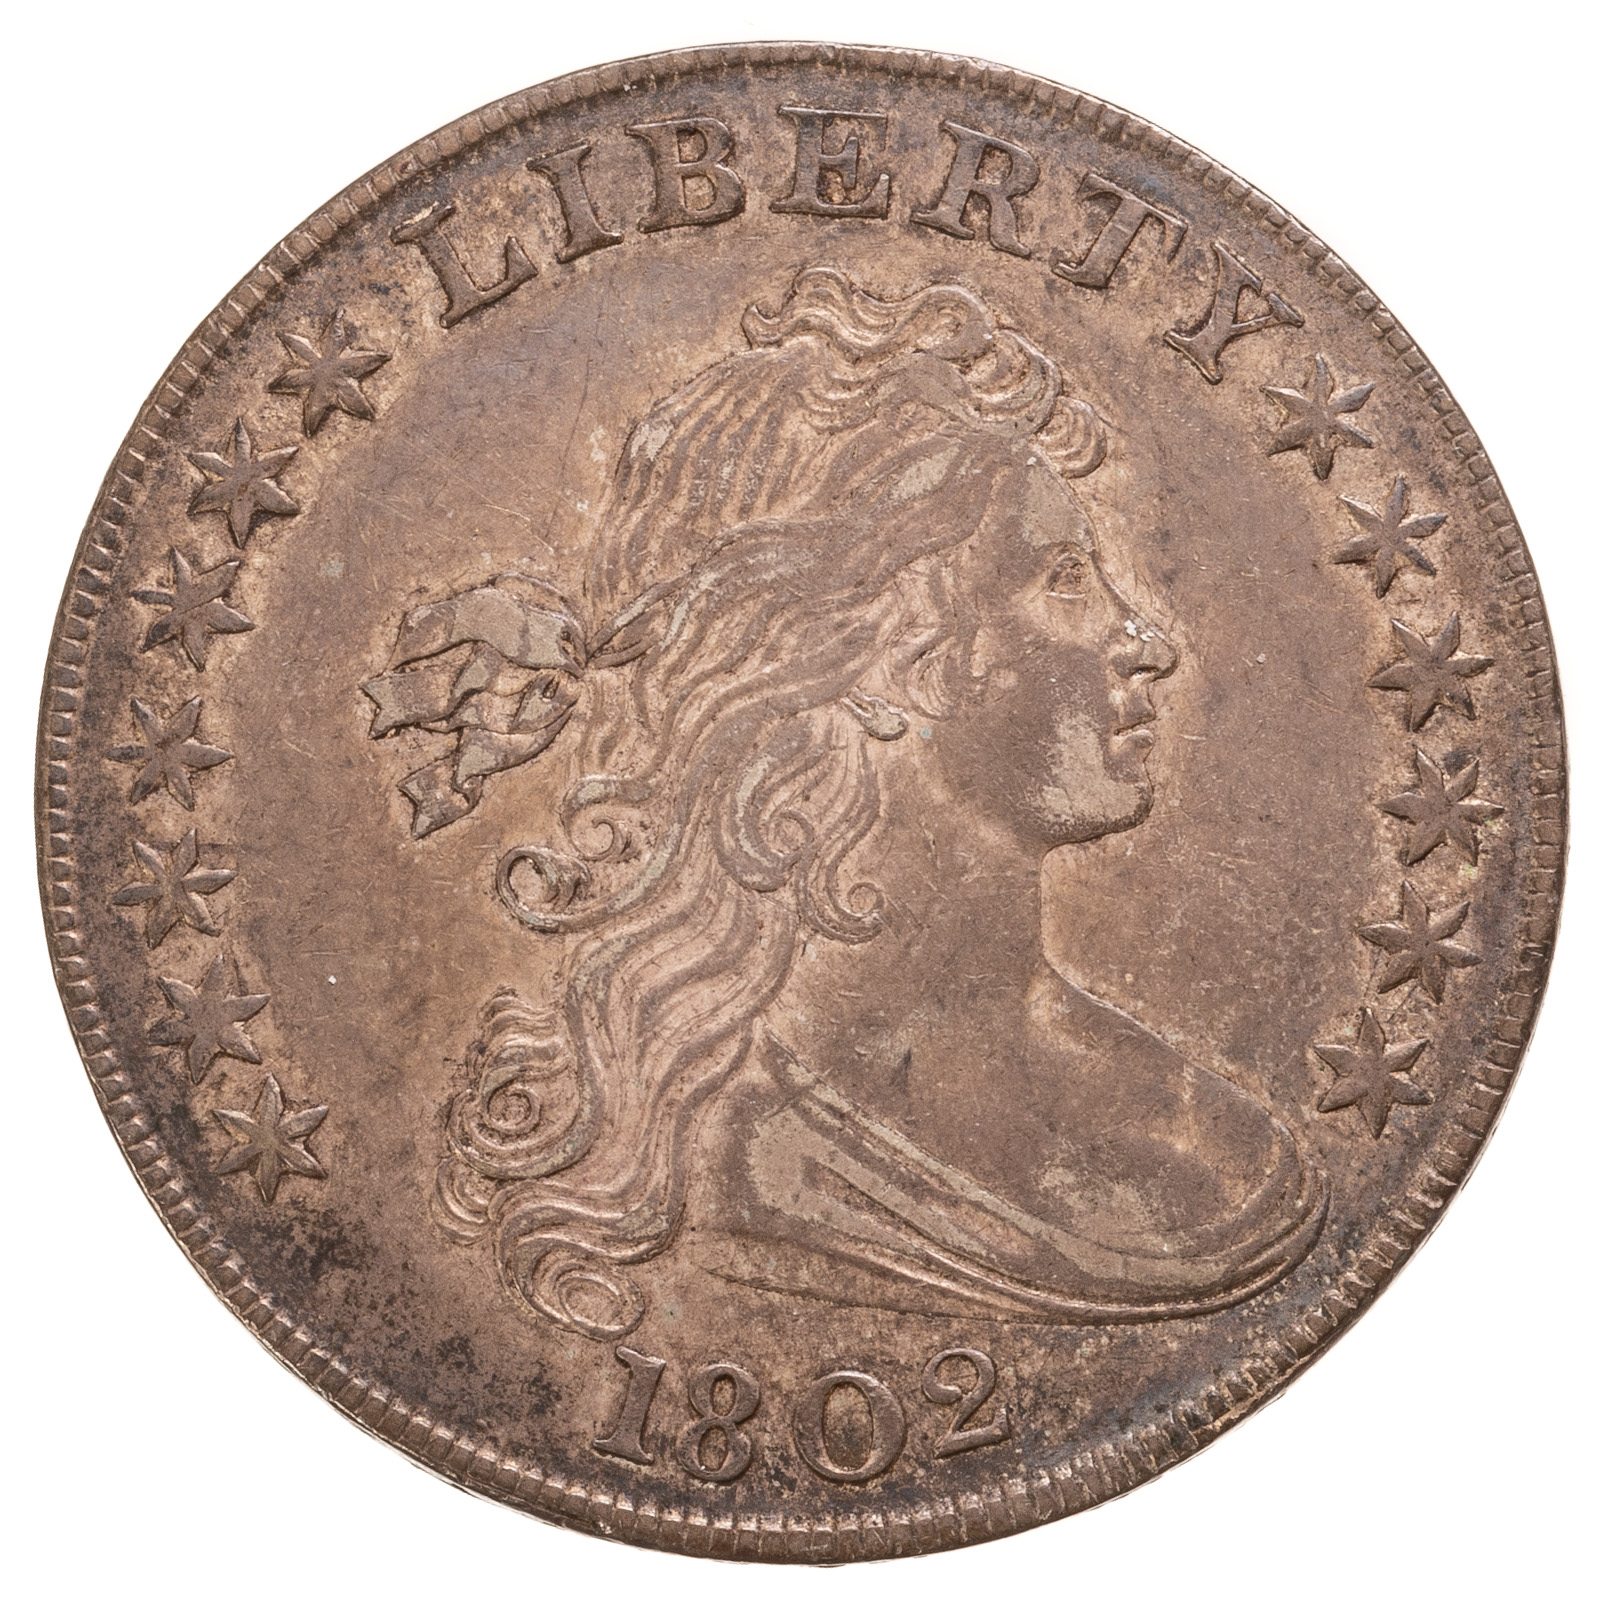 1802 BUST DOLLAR XF OR BETTER Very